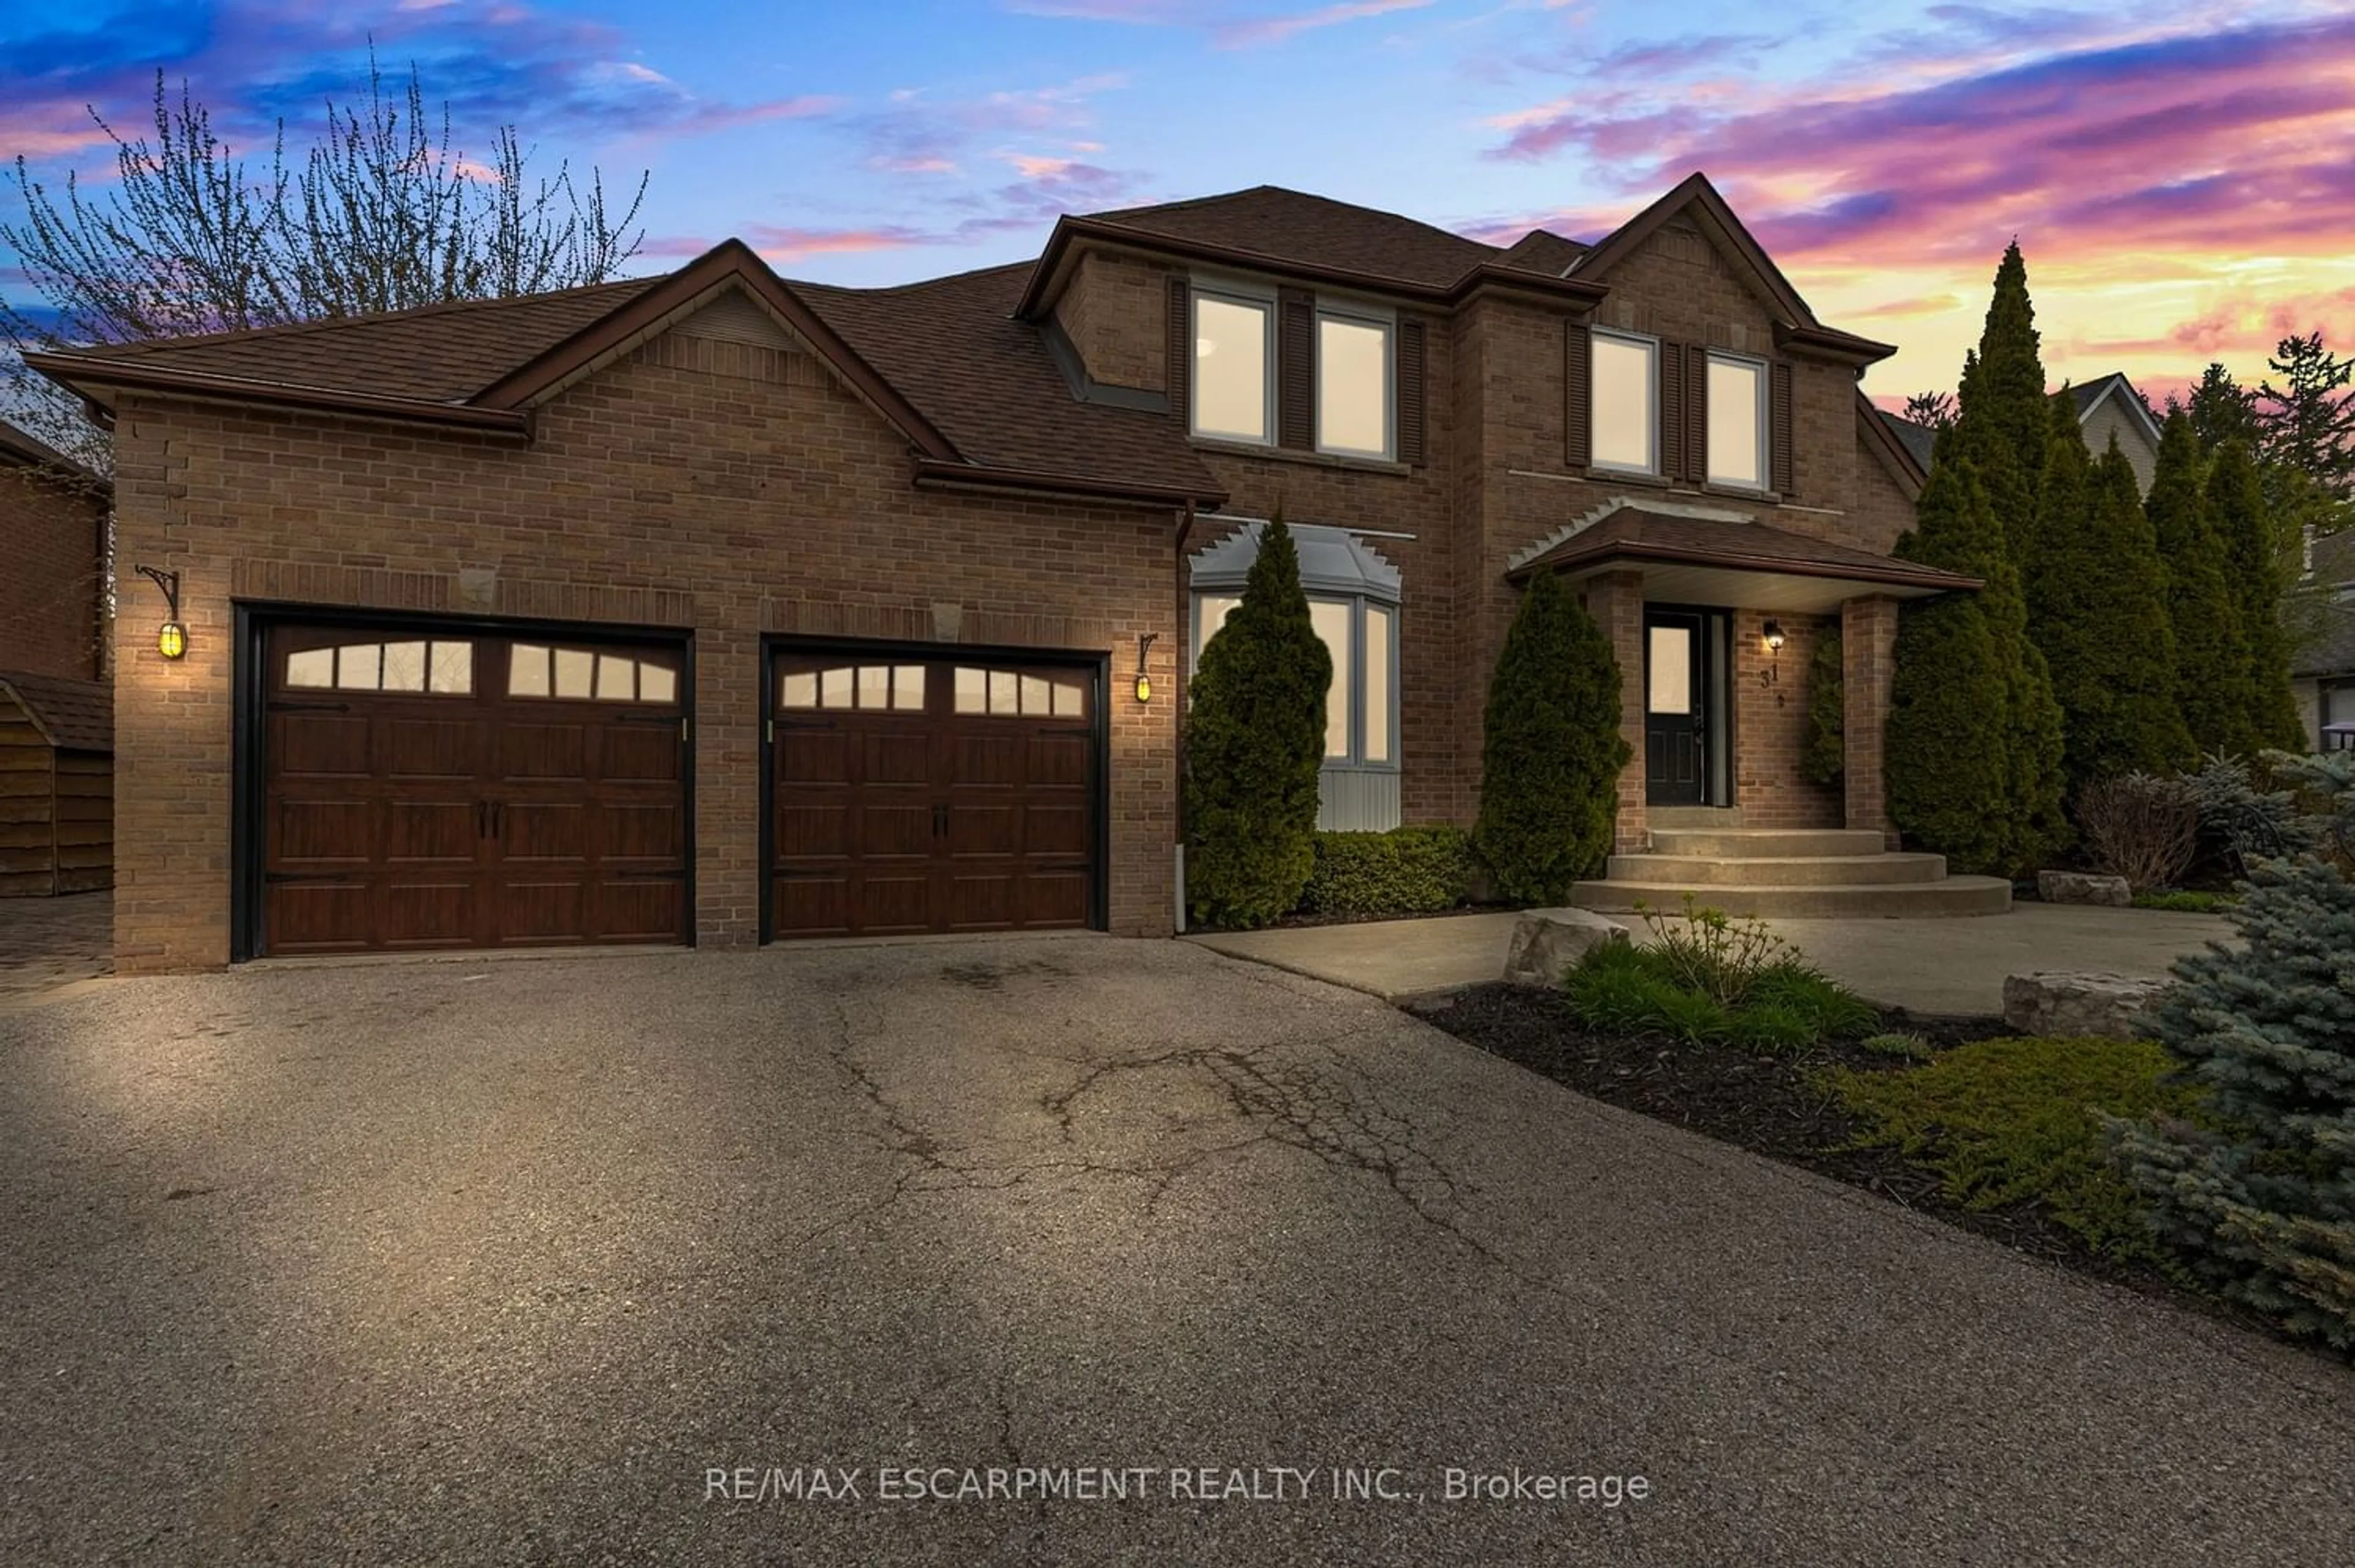 Home with brick exterior material for 31 Bloomfield Tr, Richmond Hill Ontario L4E 2J8